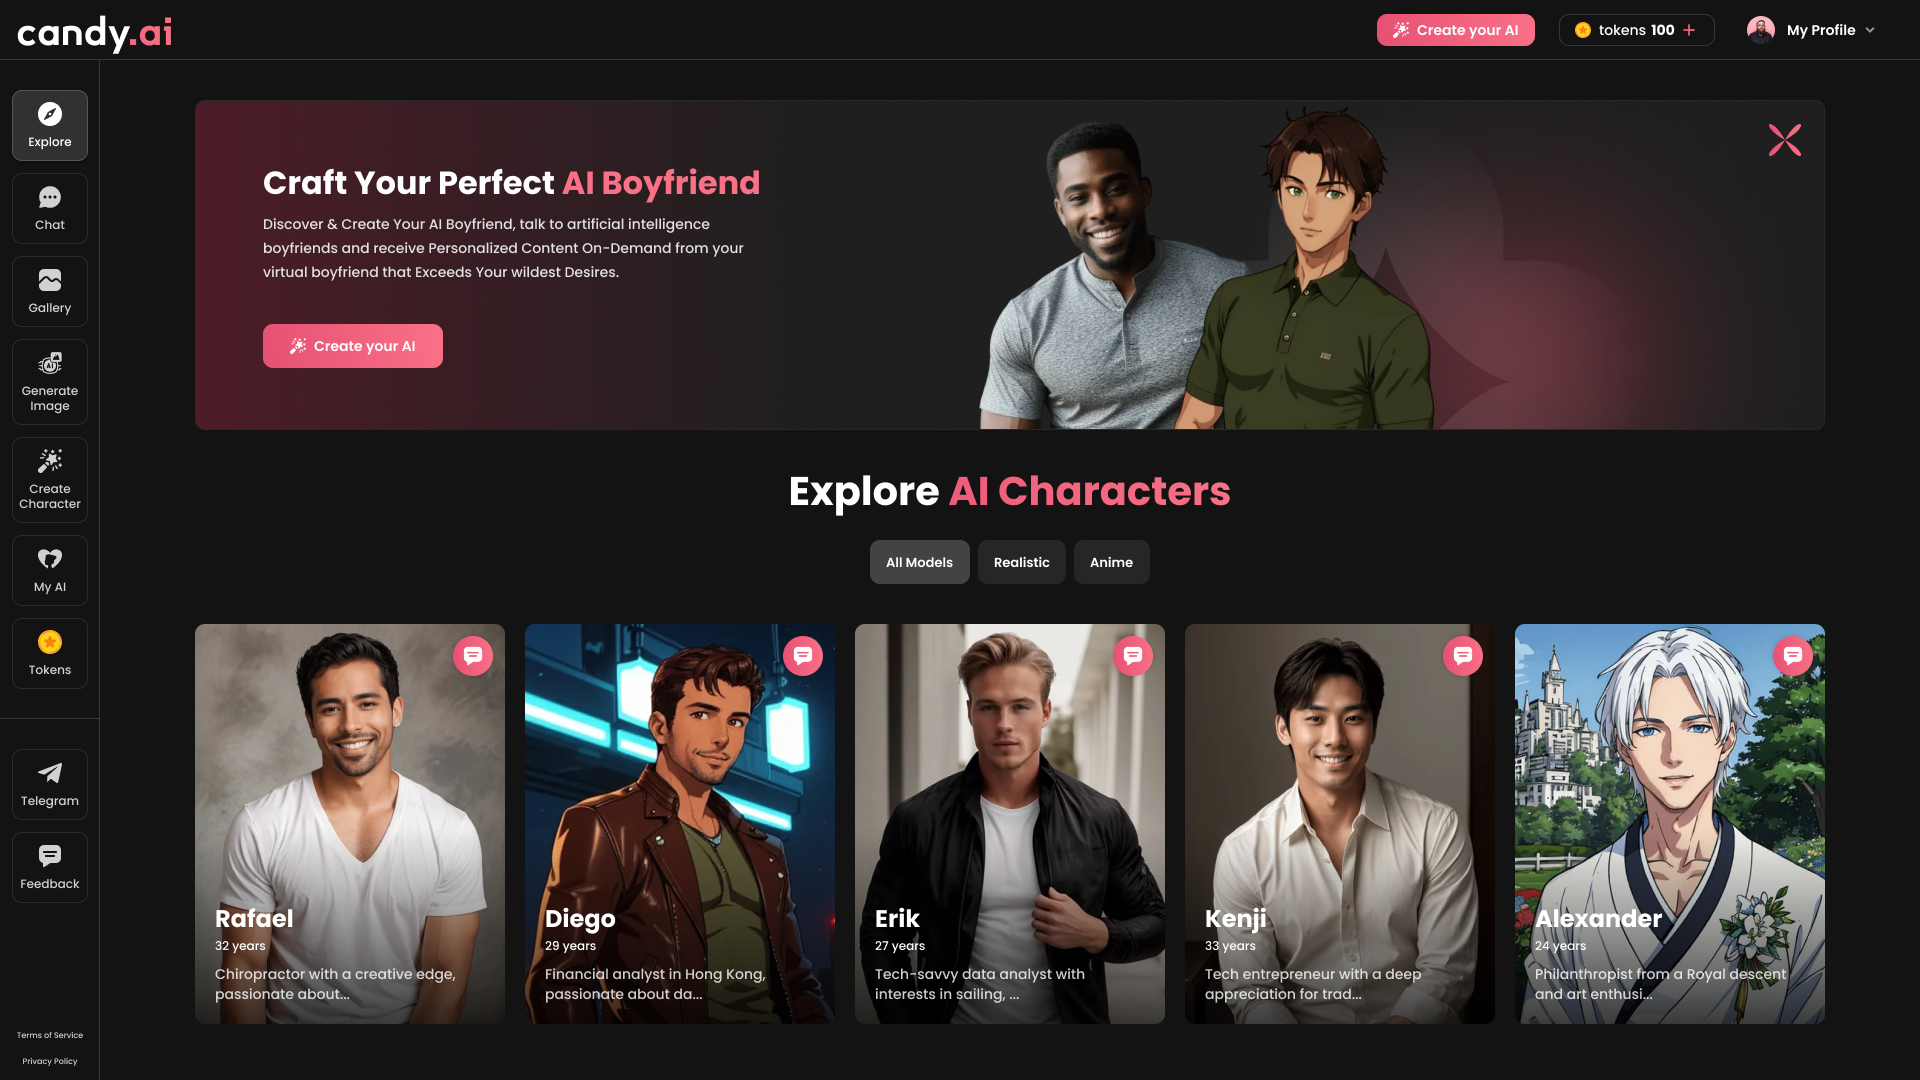 The Ultimate AI Boyfriend App: Experience Virtual Romance with Candy.ai